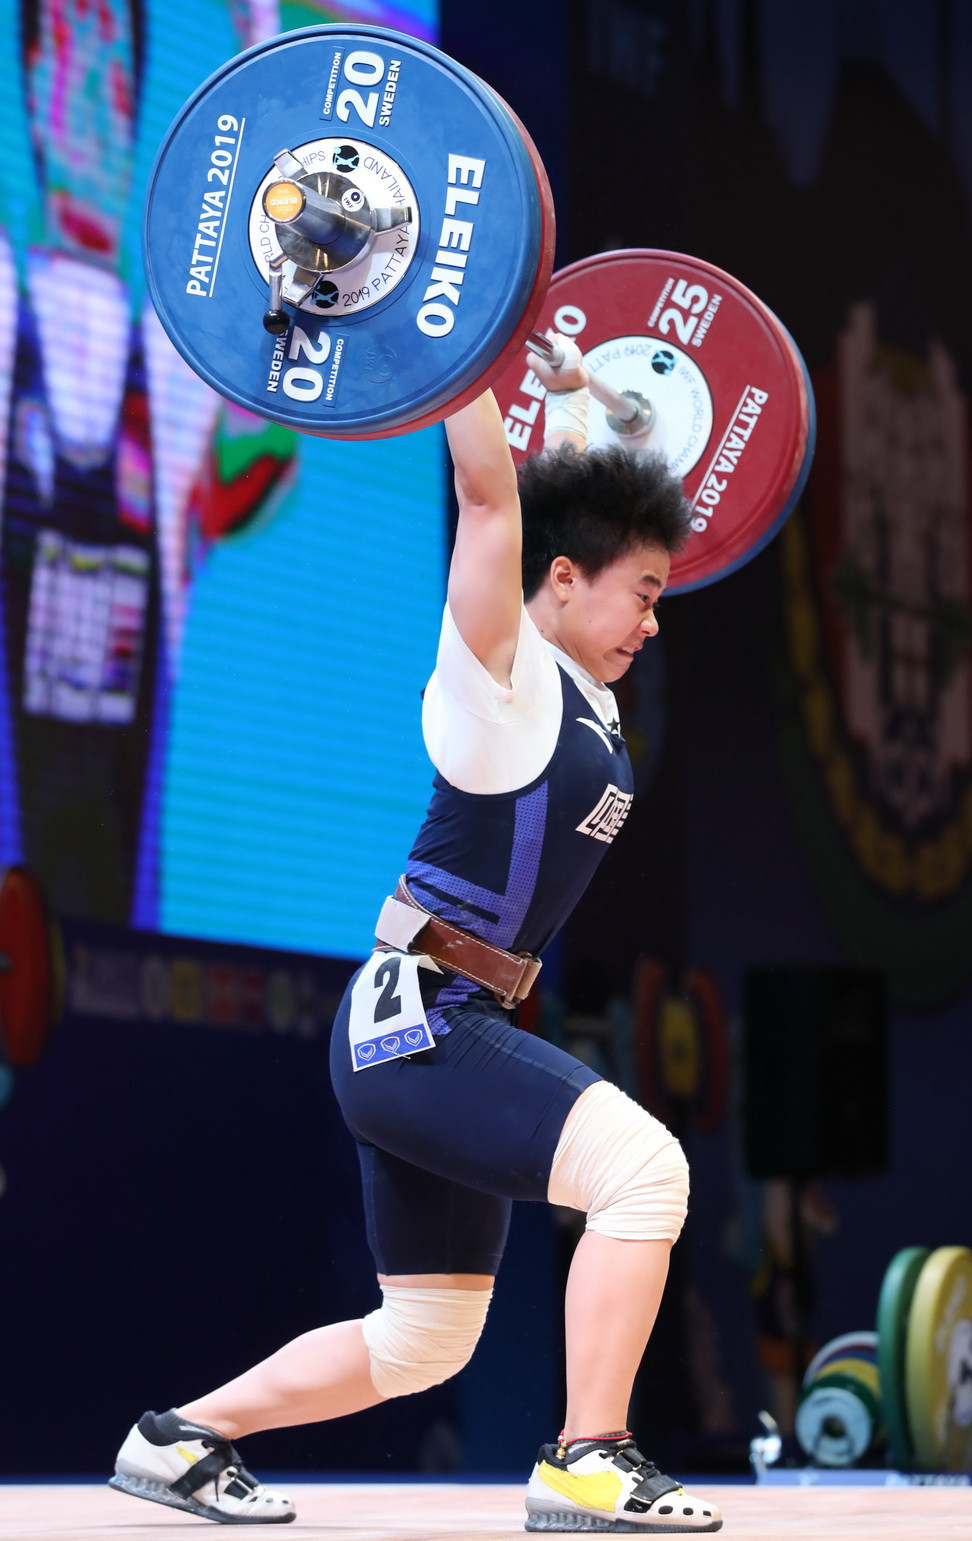 It bettered the mark of 211kg set by compatriot Hou Zhihui just moments earlier ©IWF